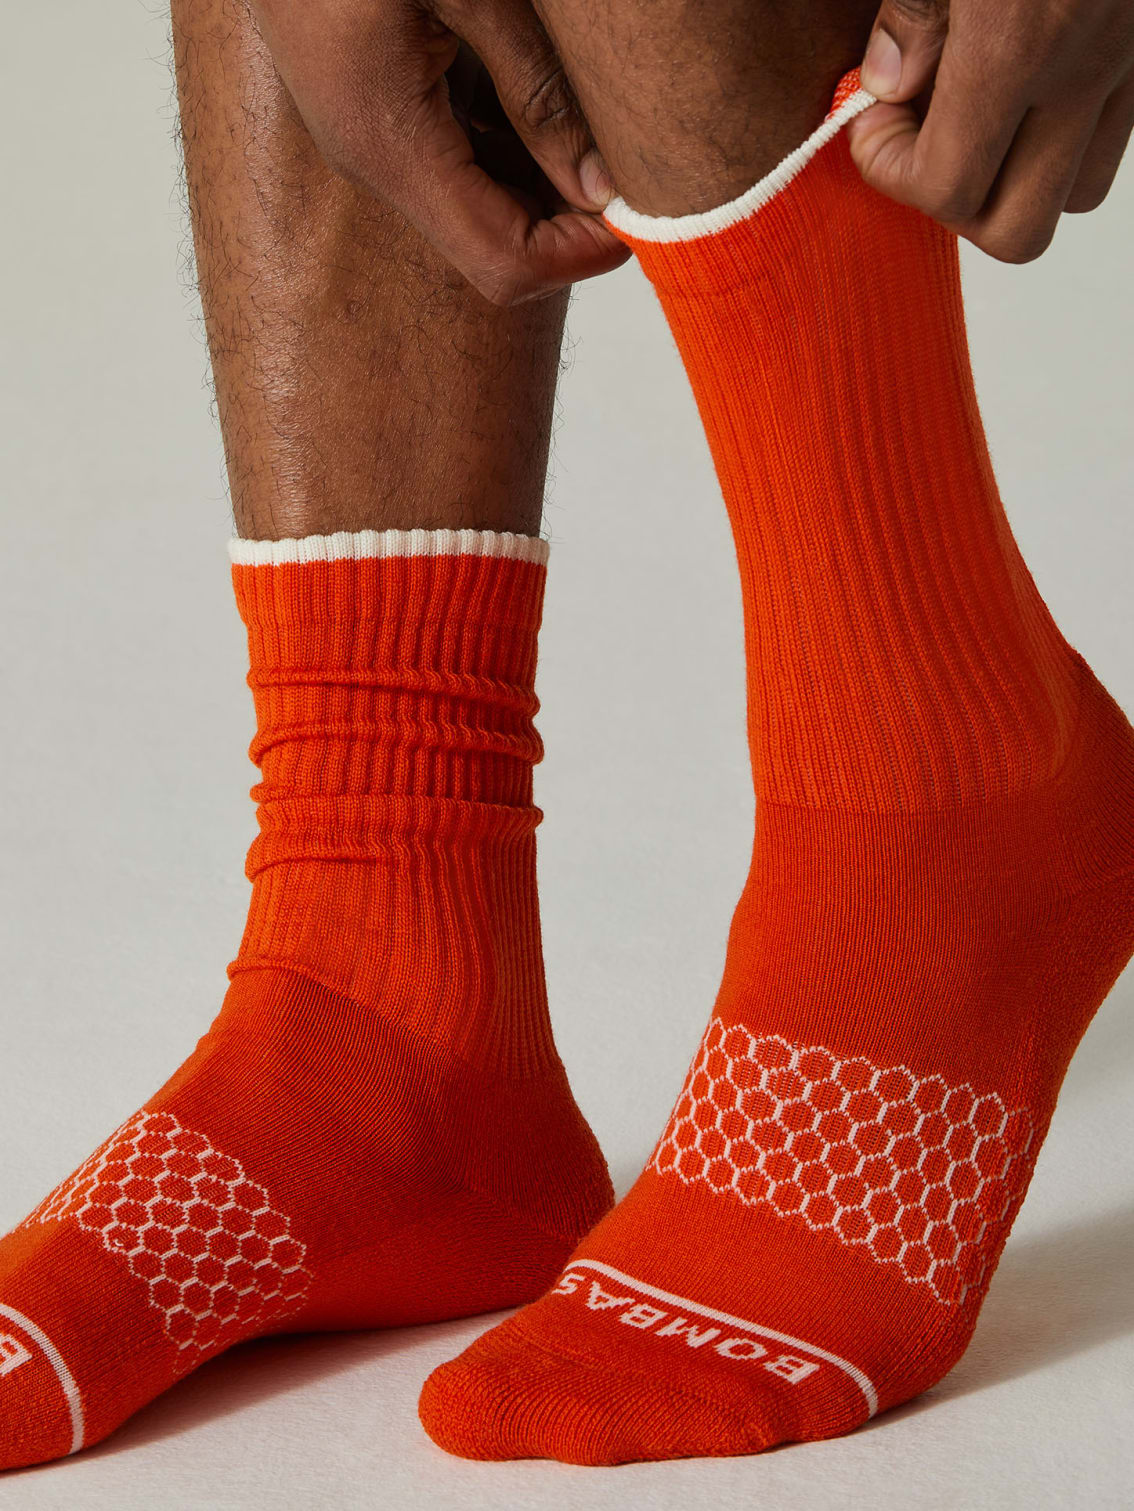 All Men's Collection – Bombas